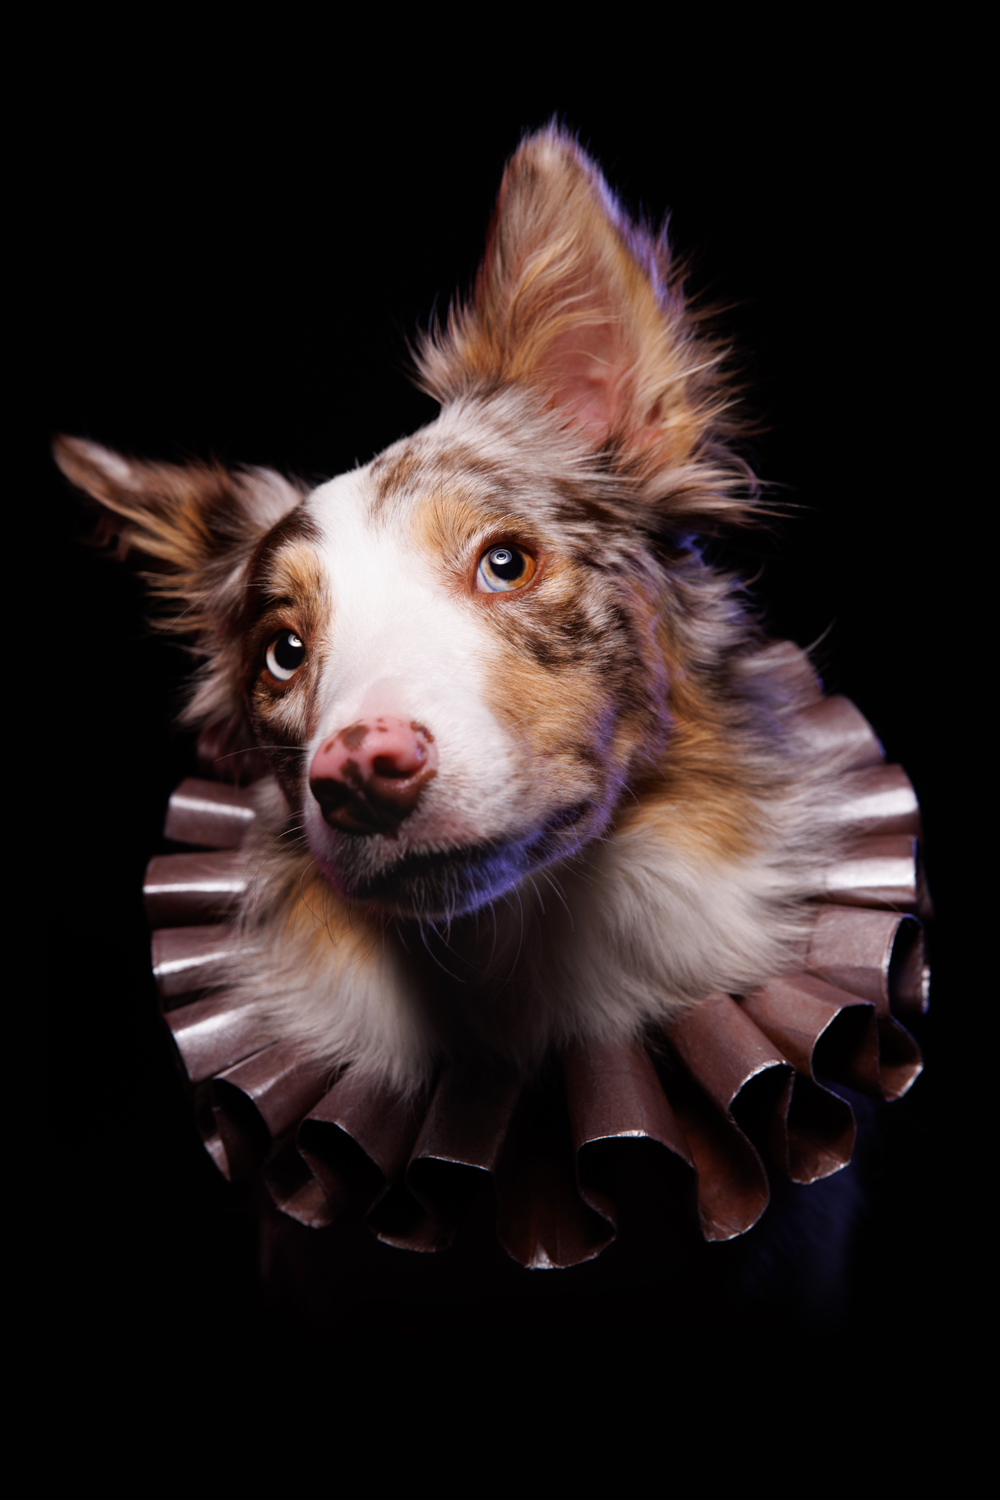 Portrait of a red merle border collie wearing a red ruff collar